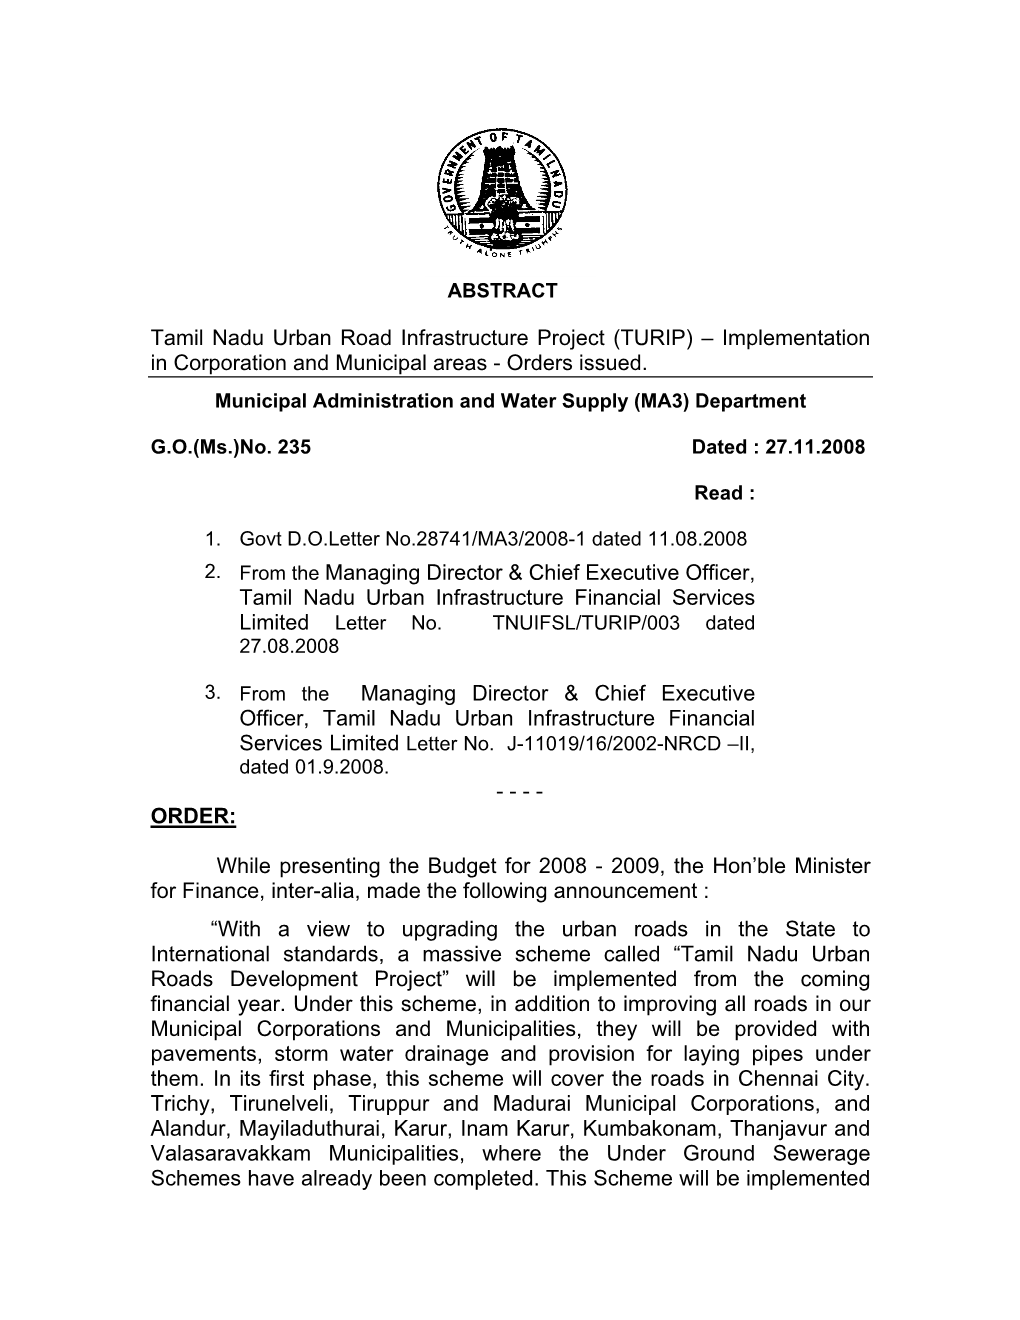 Tamil Nadu Urban Road Infrastructure Project (TURIP) – Implementation in Corporation and Municipal Areas - Orders Issued